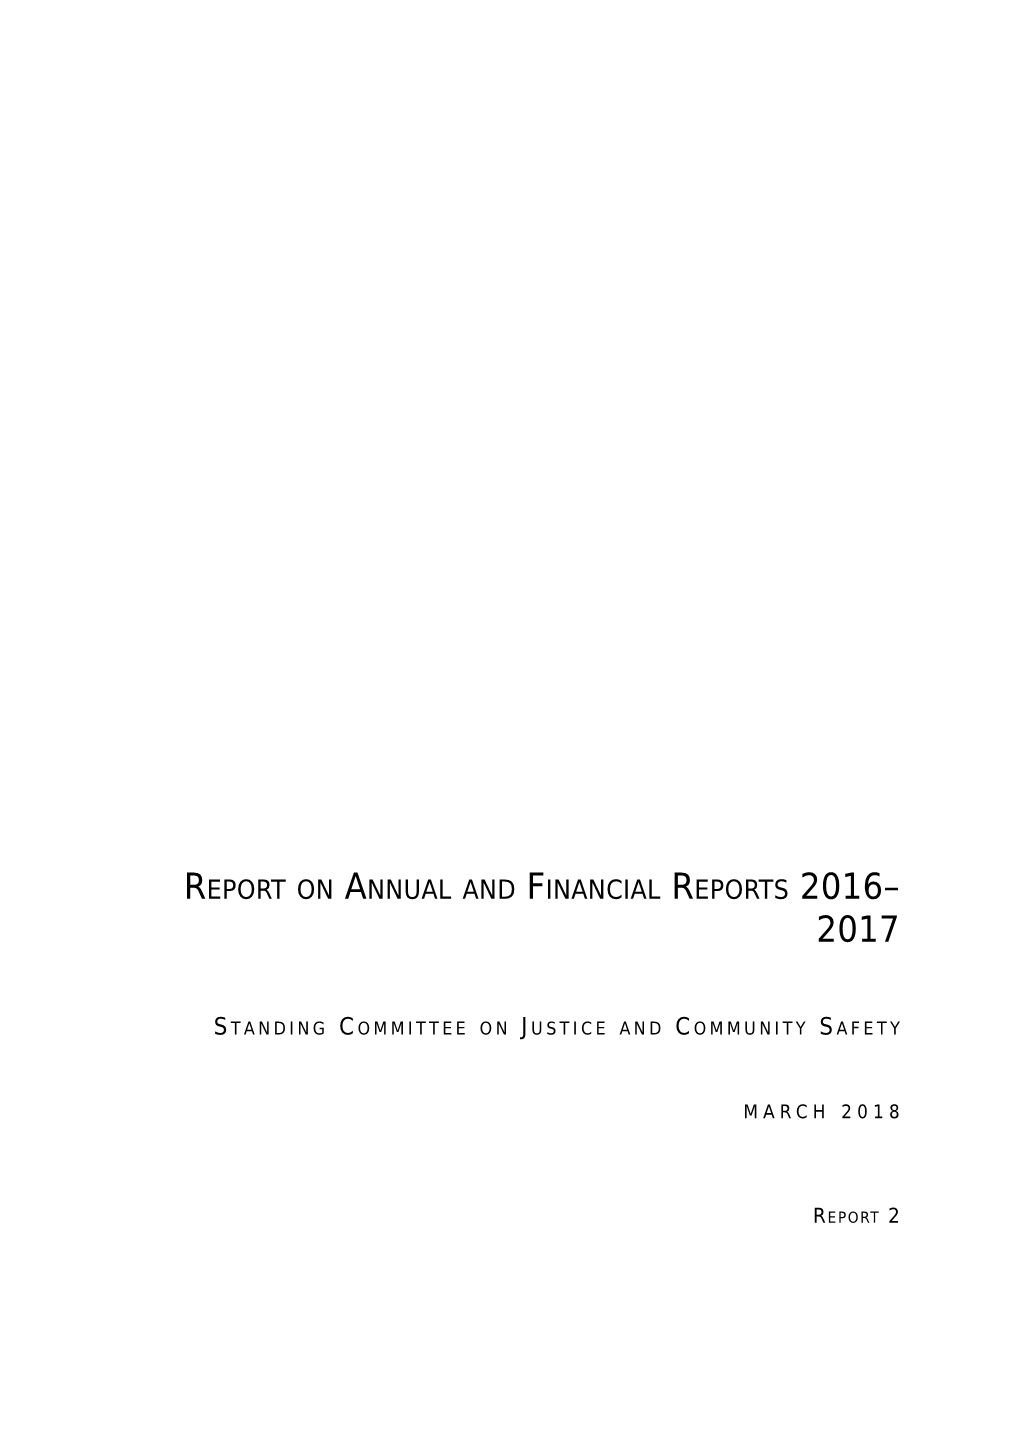 Report on Annual and Financial Reports 2015-2016